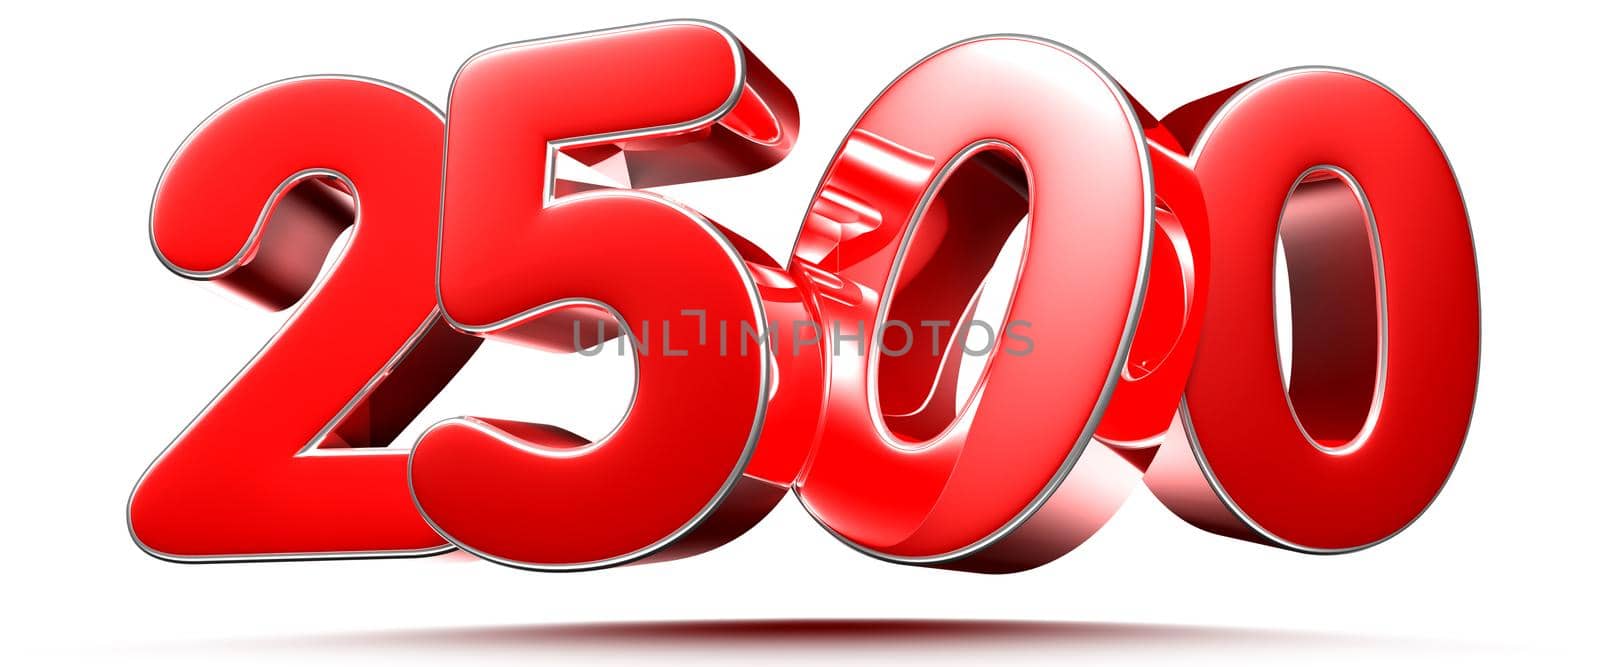 Rounded red numbers 2500 on white background 3D illustration with clipping path